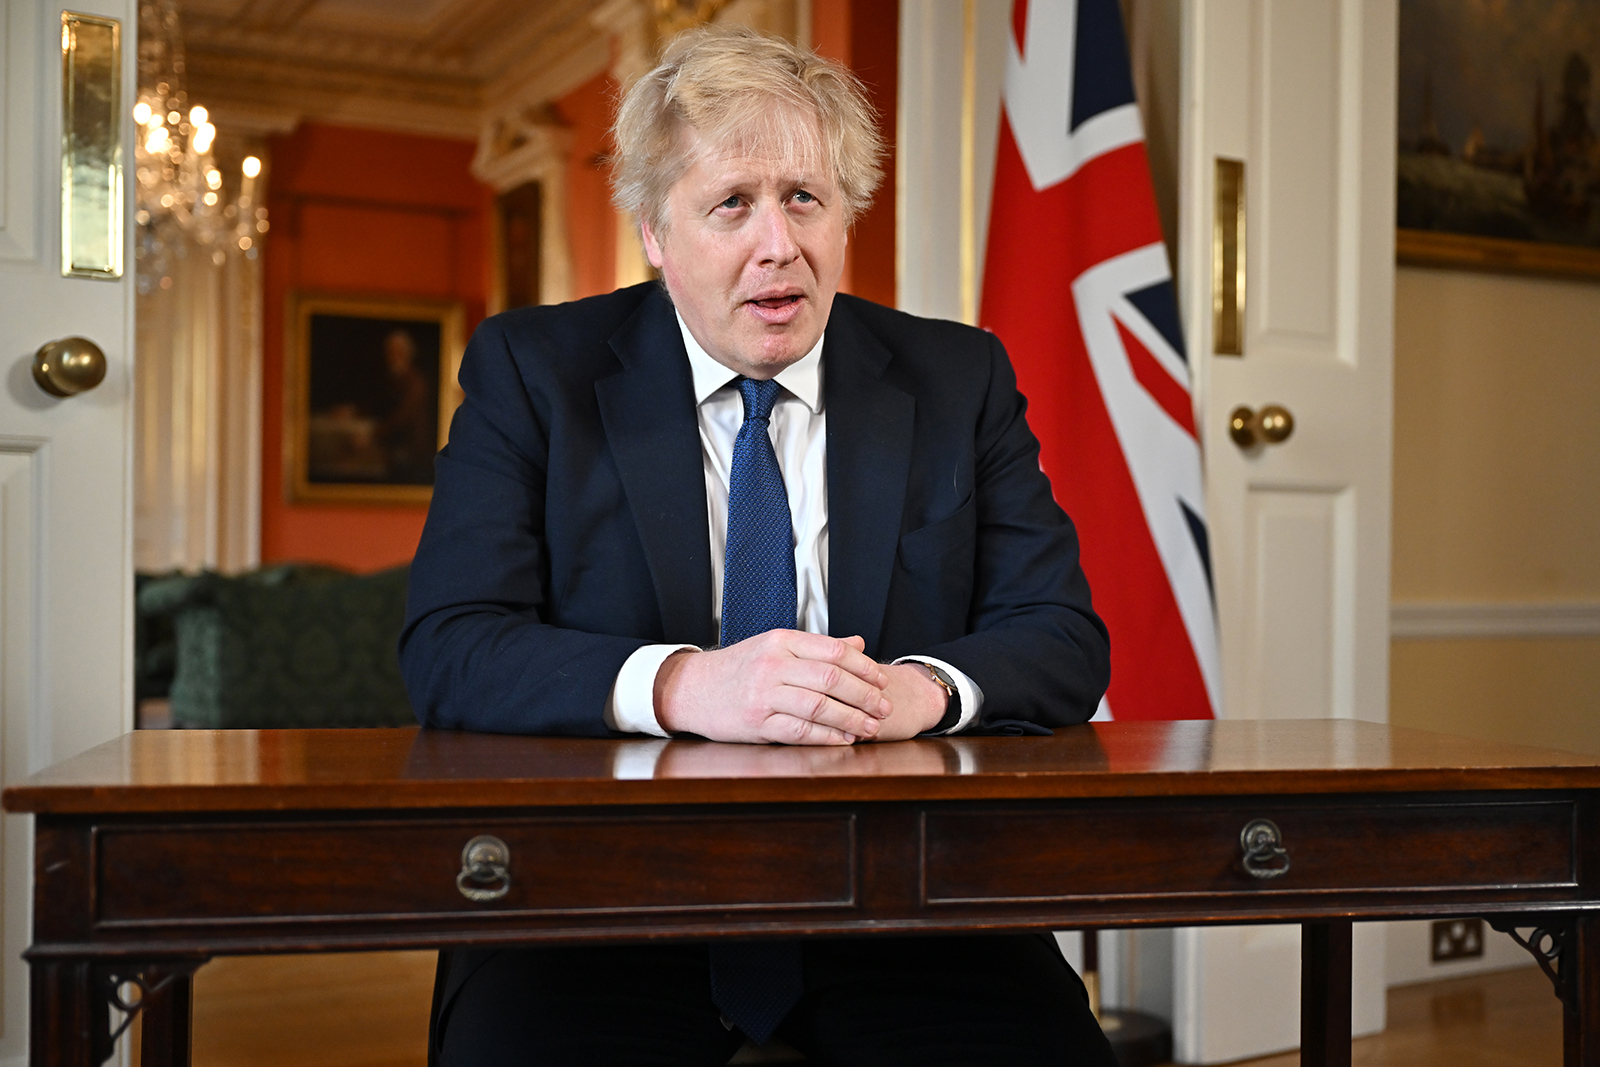 Prime Minister Boris Johnson records an address at Downing Street after he chaired an emergency Cobra meeting to discuss the UK response to the crisis in Ukraine on February 24, in London, England. 